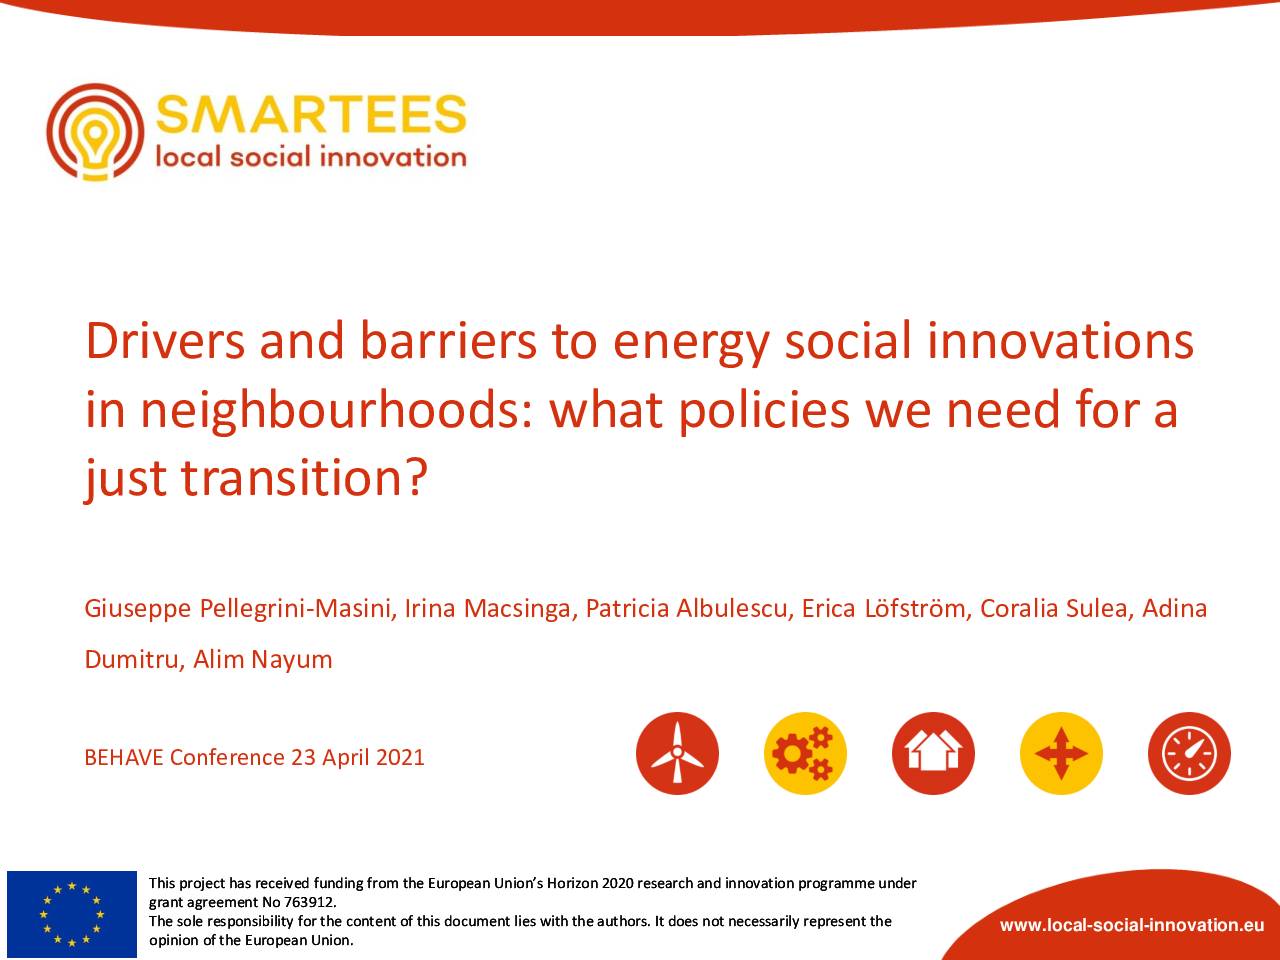 Drivers and barriers to energy social innovations in neighbourhoods: what policies we need for a just transition